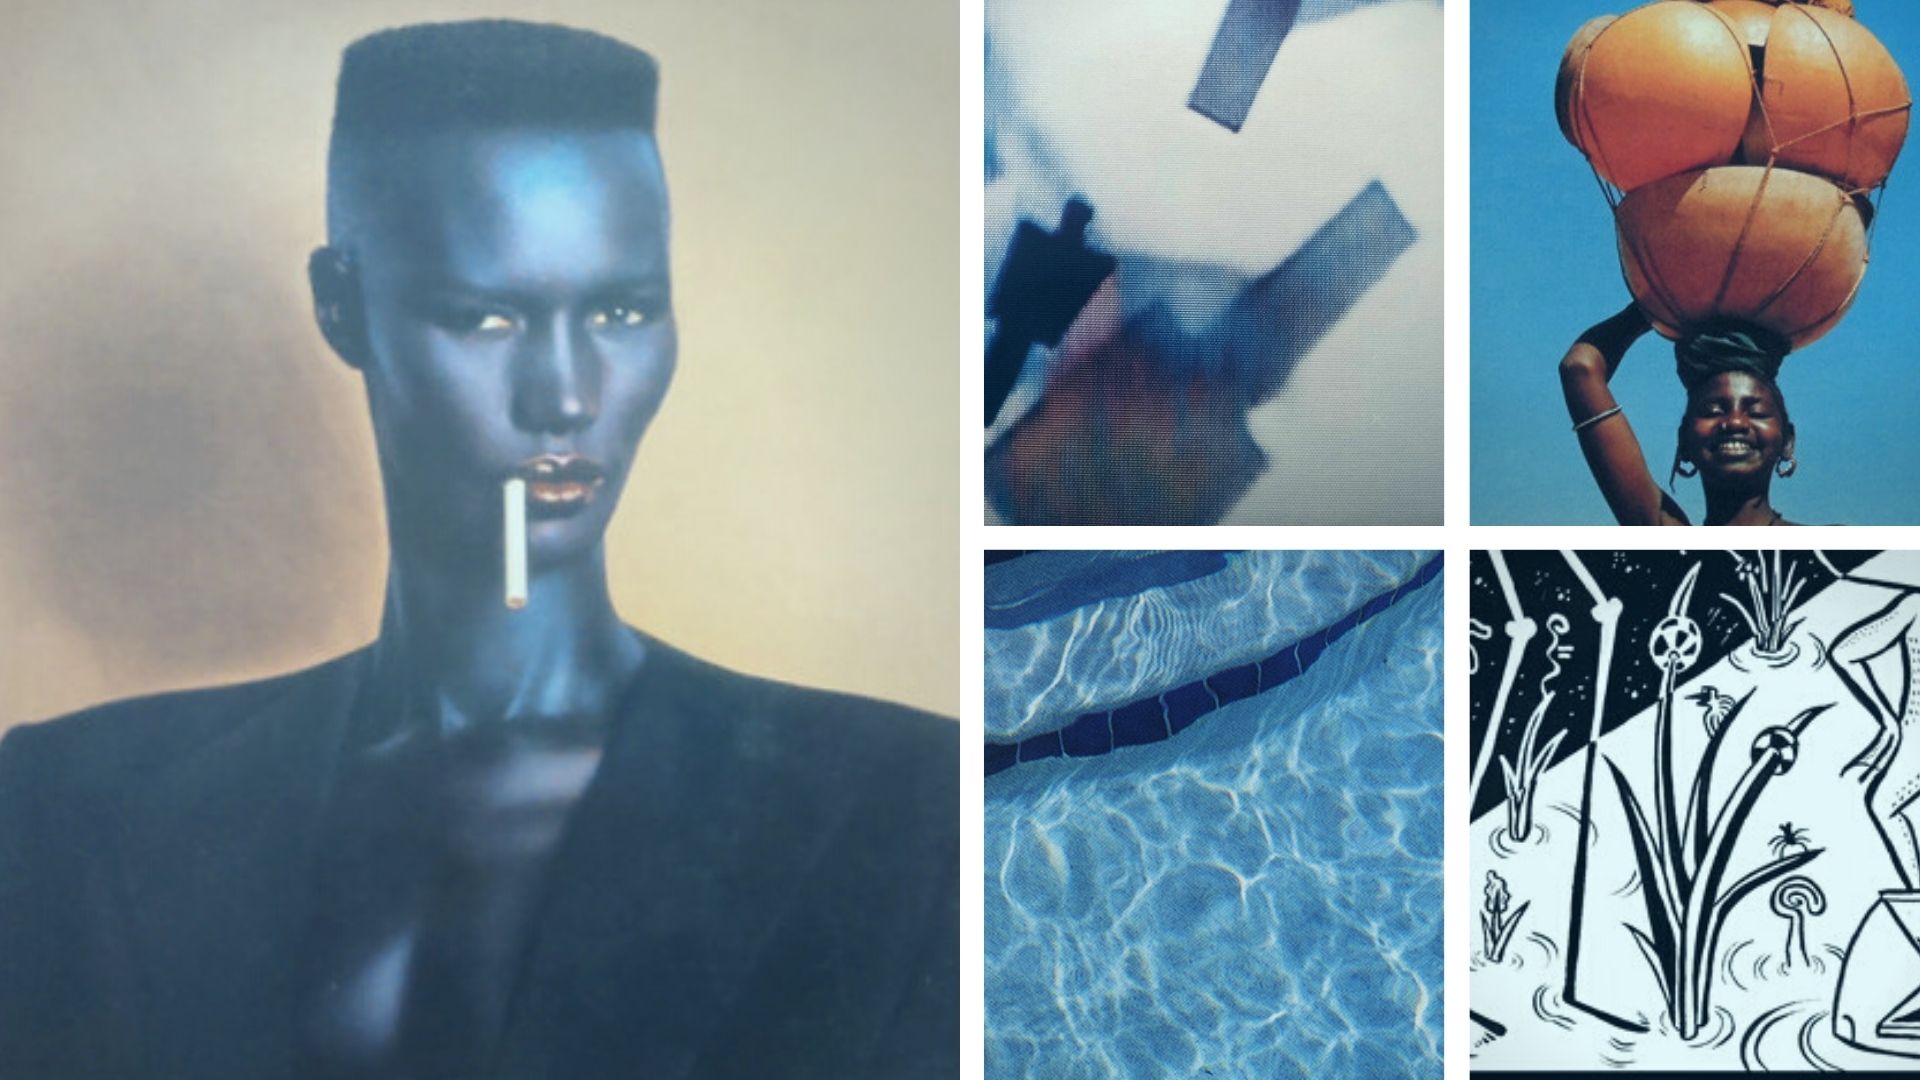 If You Like Nightclubbing by Grace Jones, Listen to These 4 Albums